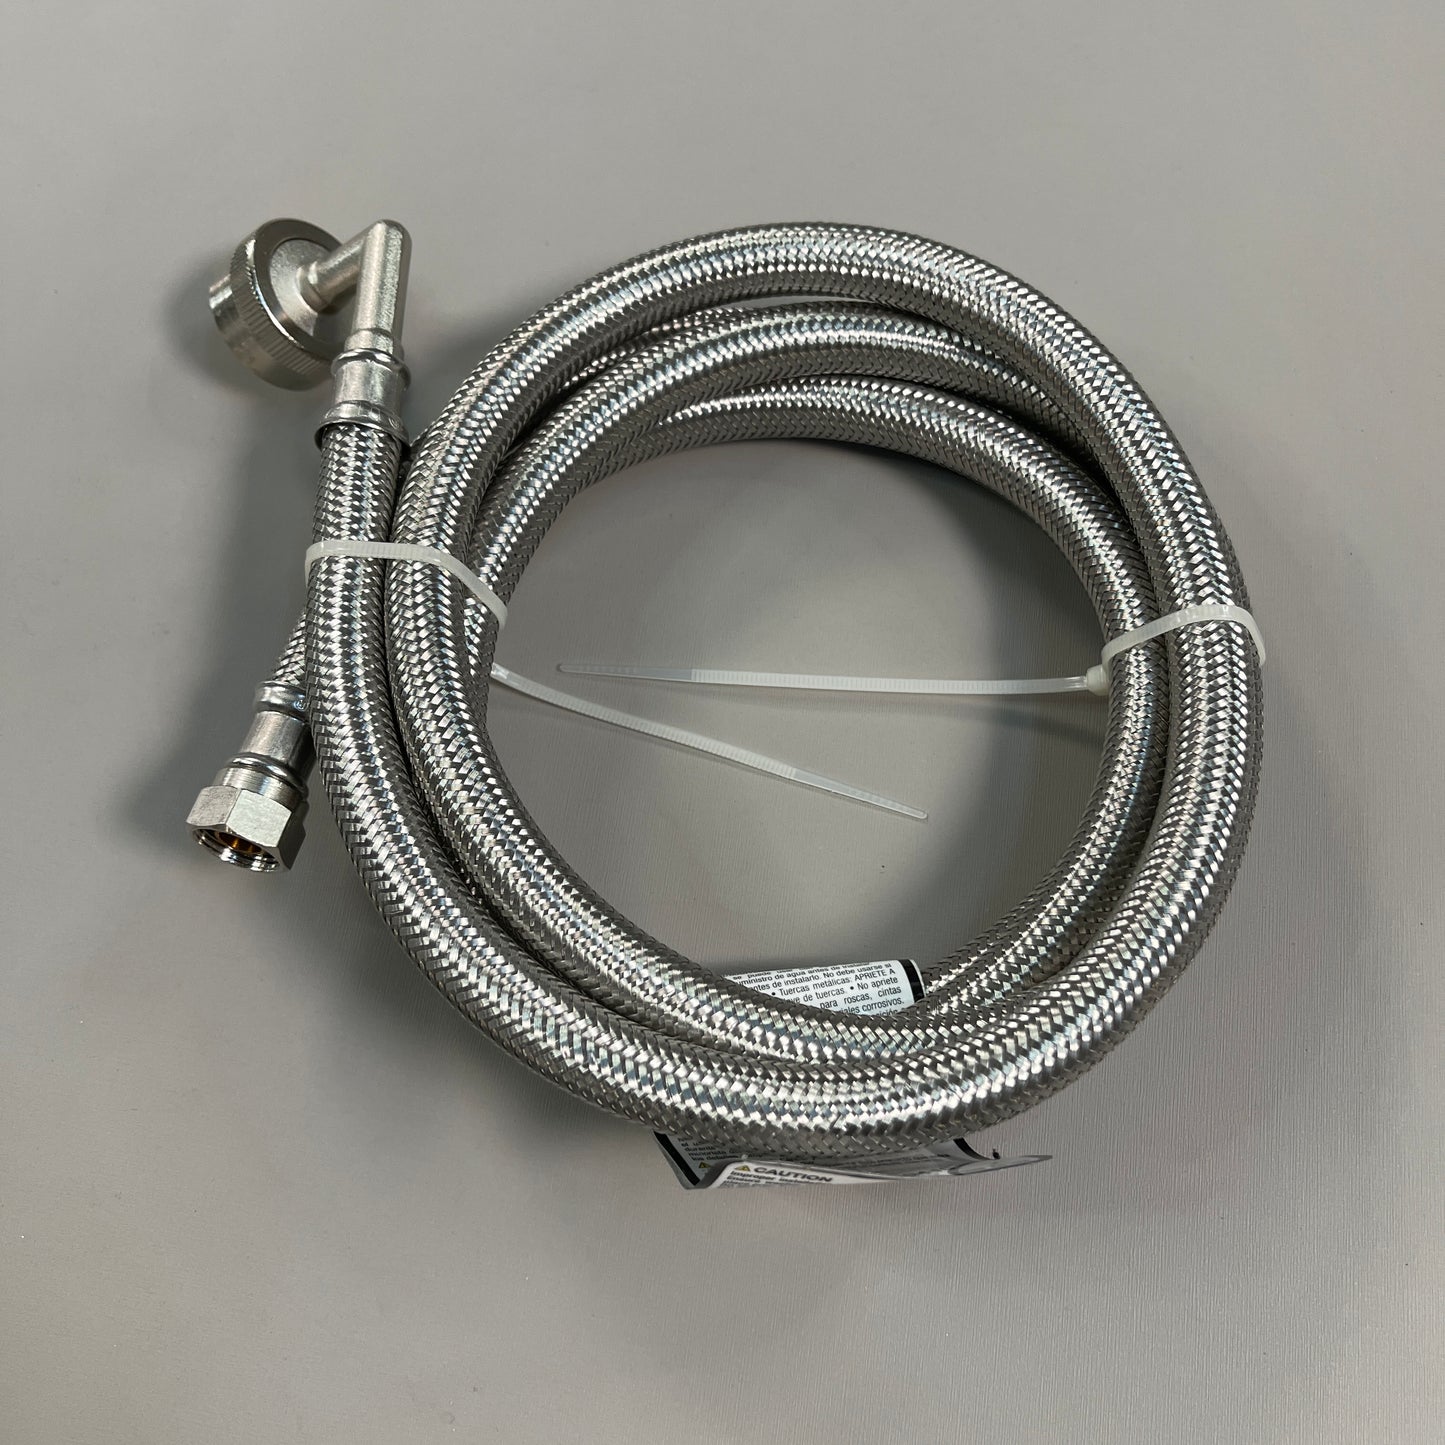 ELECTROLUX 6 ft Dishwasher Braided Stainless Waterline Molded 3/4" To Hose Elbow 5304520432 (New)